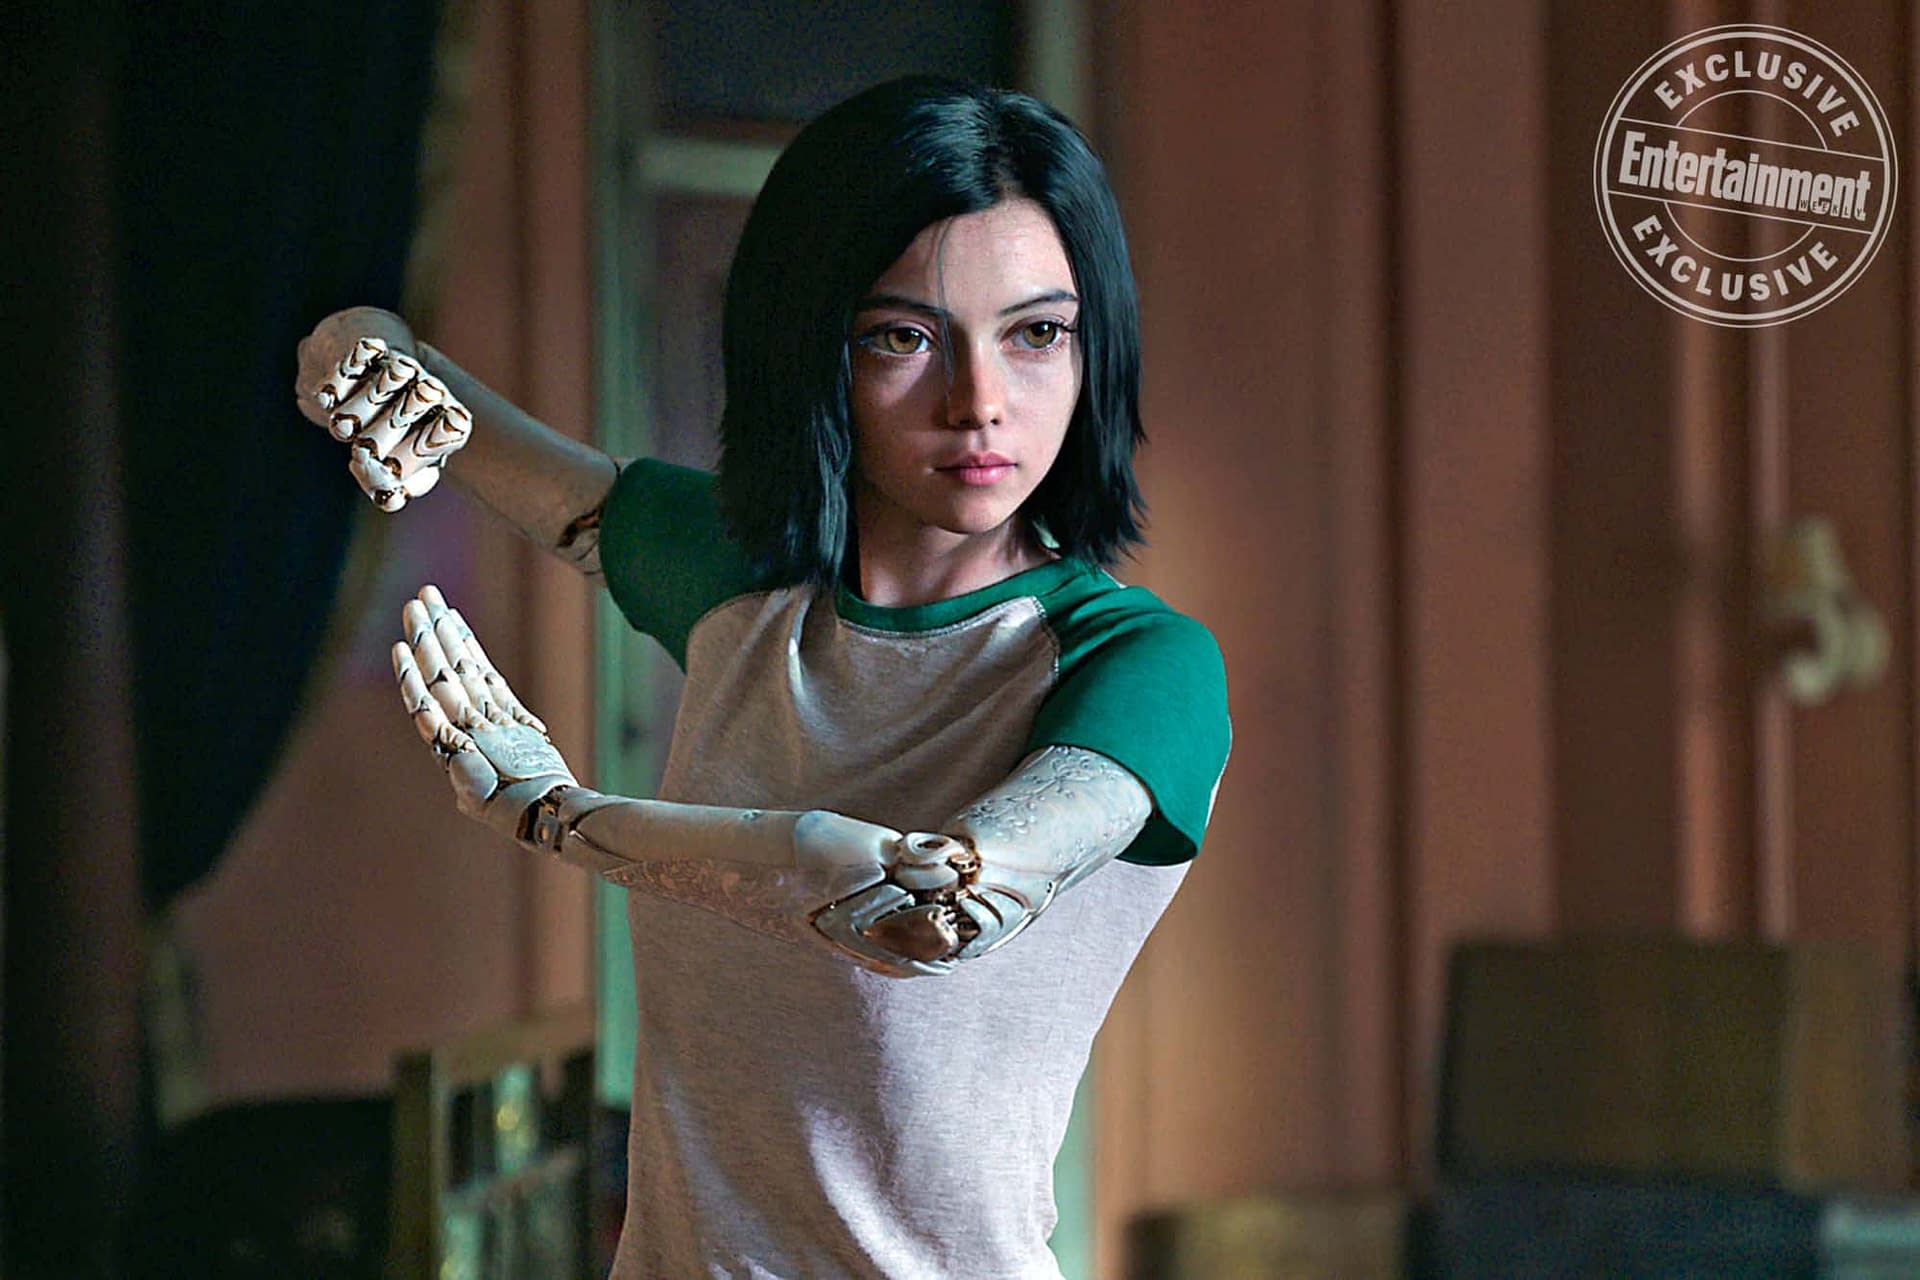 Star of Alita: Battle Angel Talks About How Important It Is to Show Dynamic Women